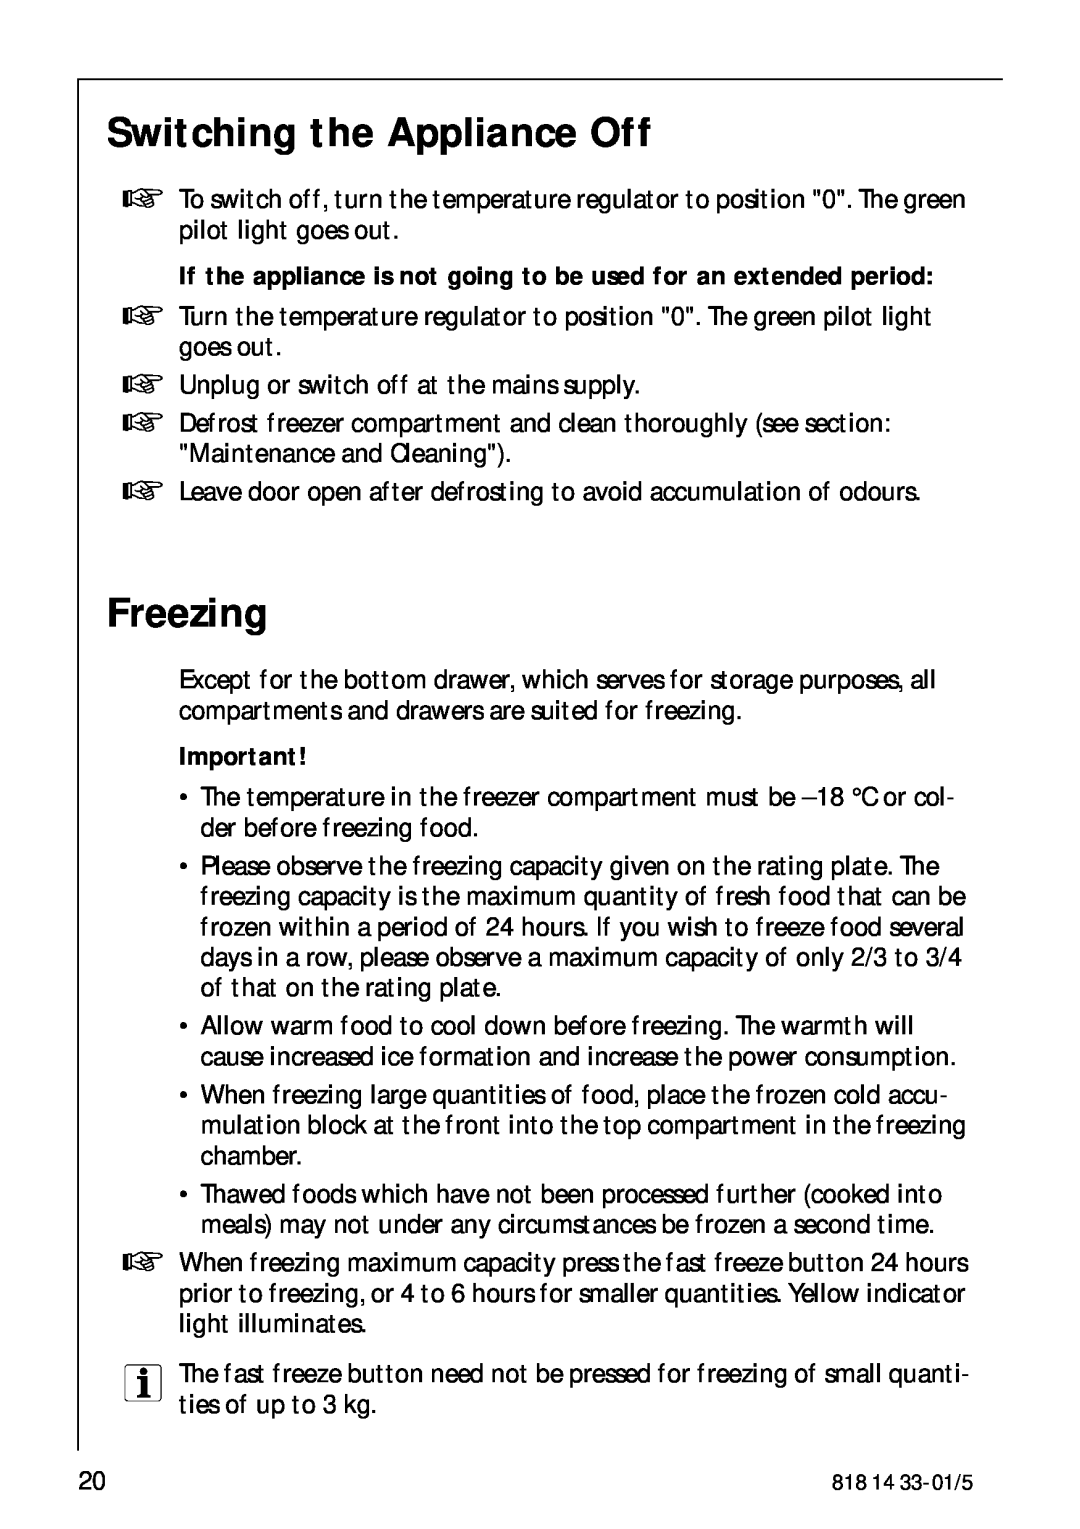 AEG 2150-6GS manual Switching the Appliance Off, Freezing, If the appliance is not going to be used for an extended period 